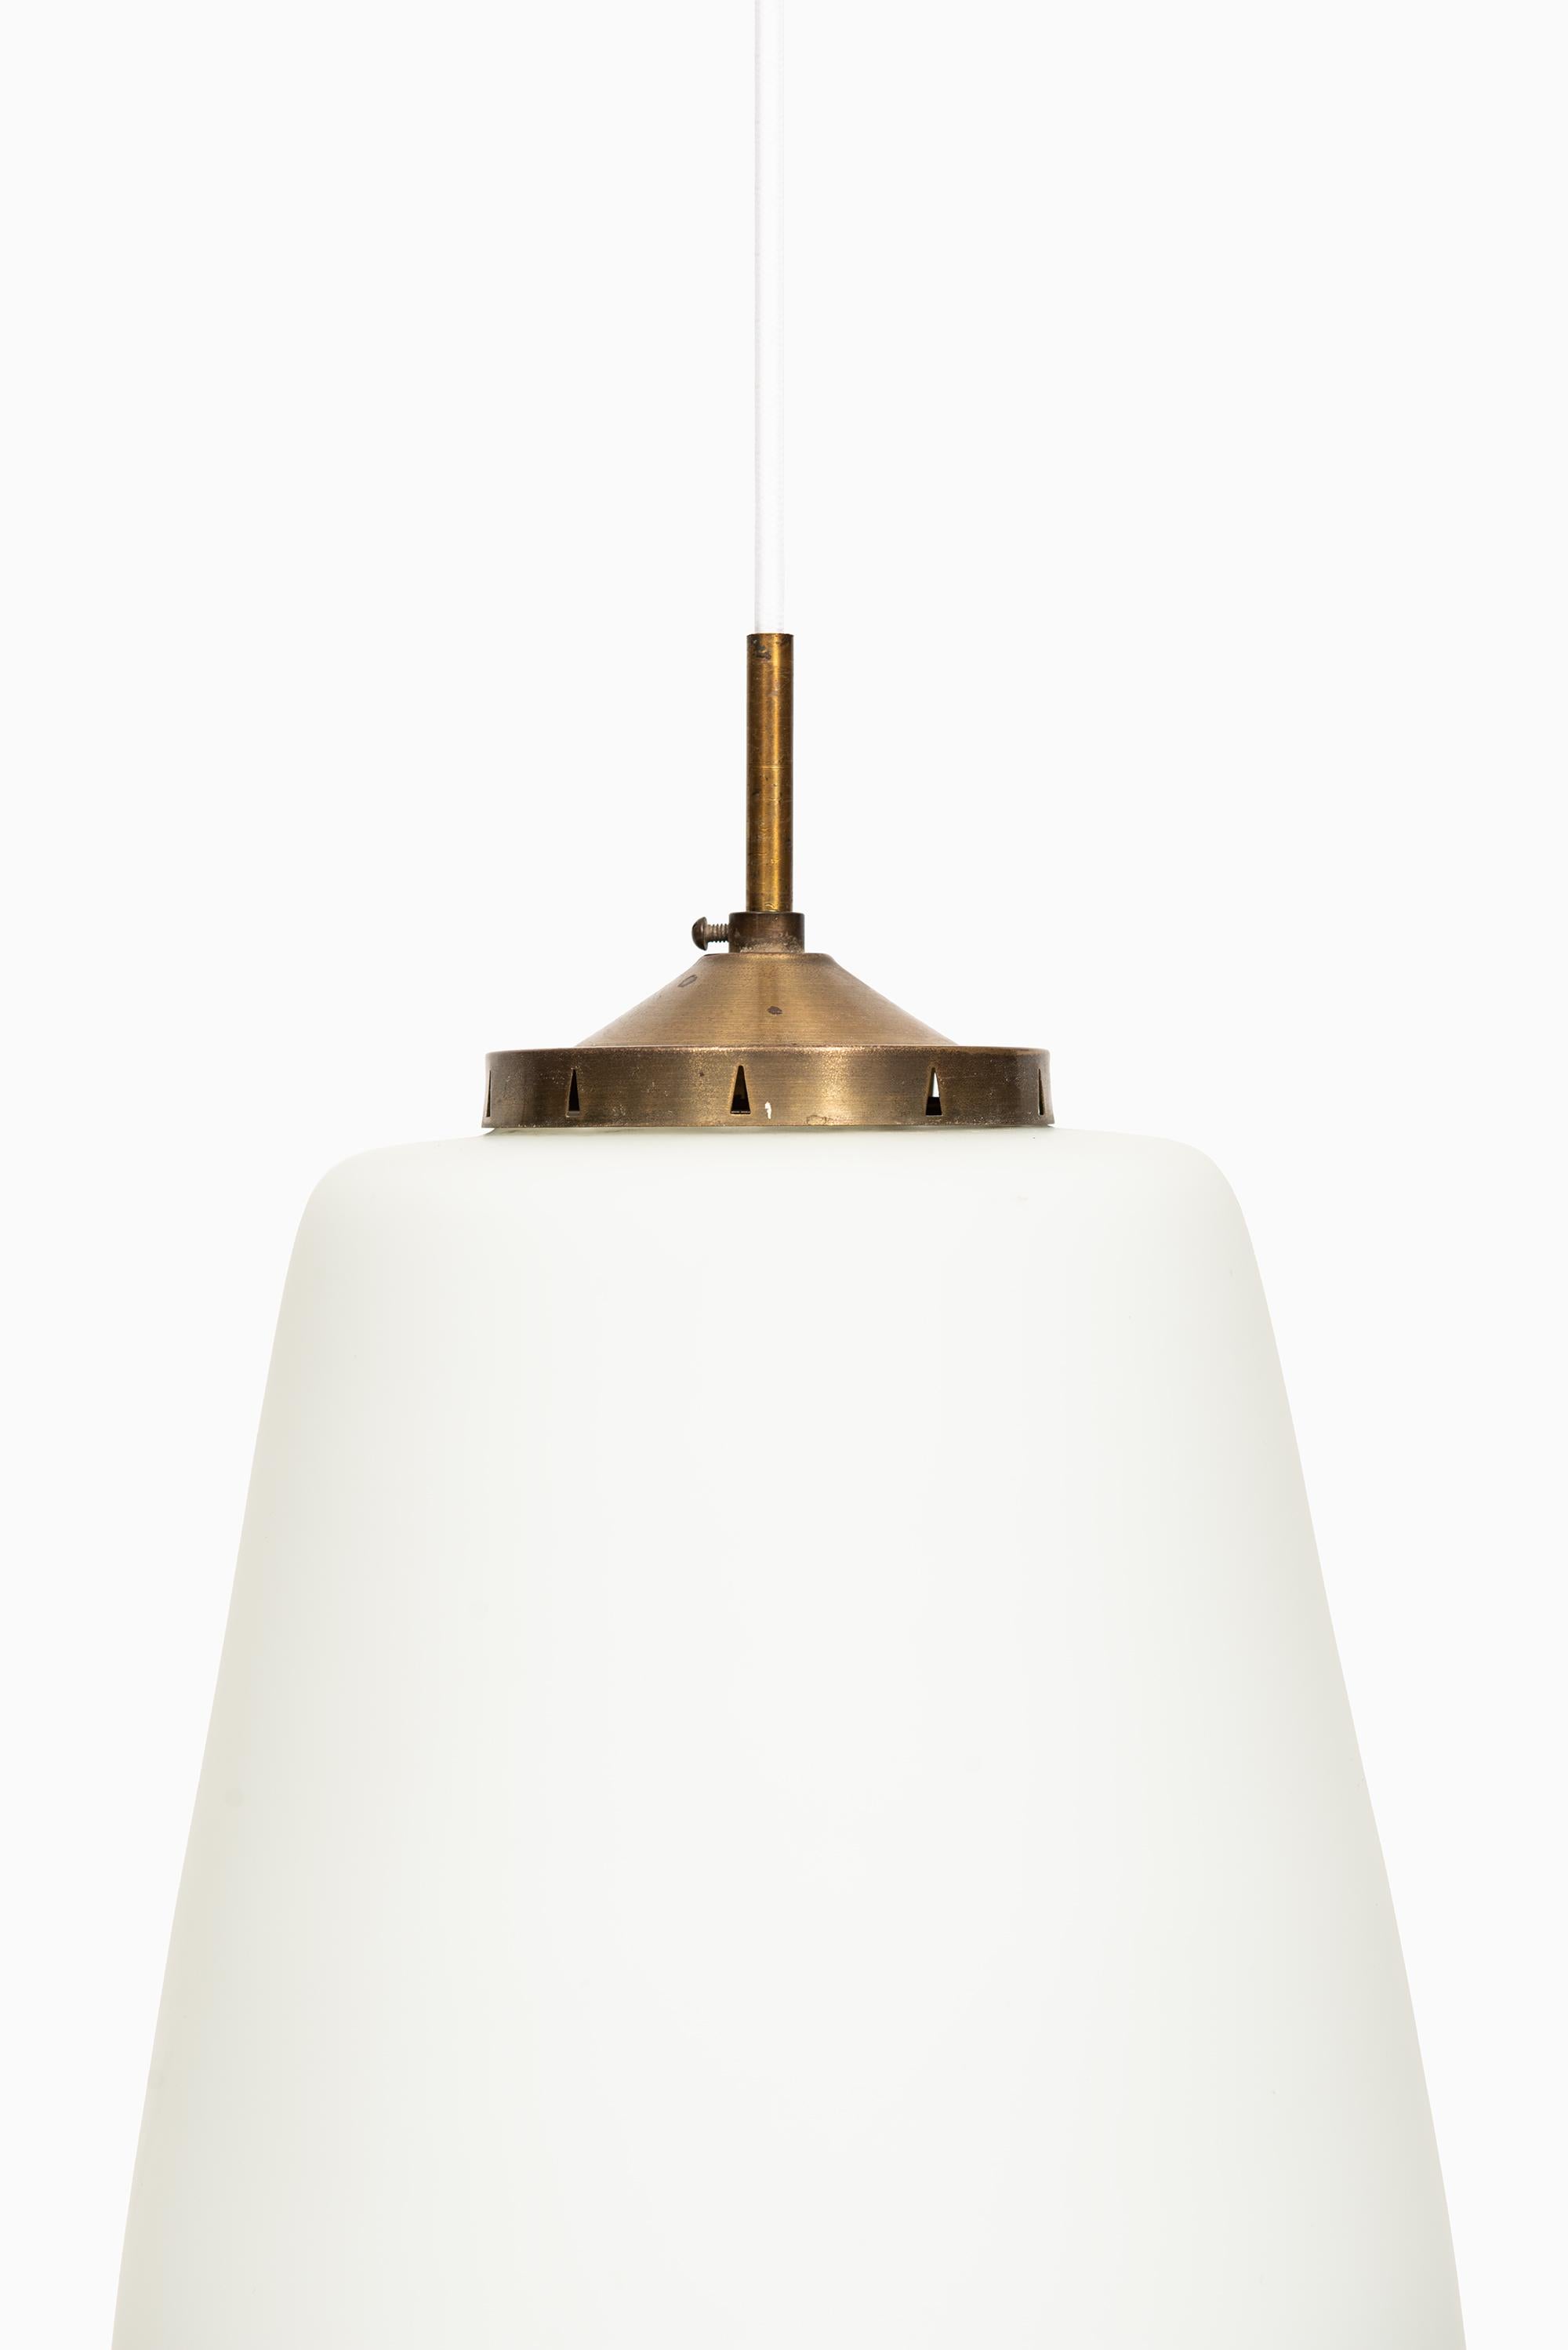 Rare ceiling lamp designed by Bent Karlby. Produced by Lyfa in Denmark.